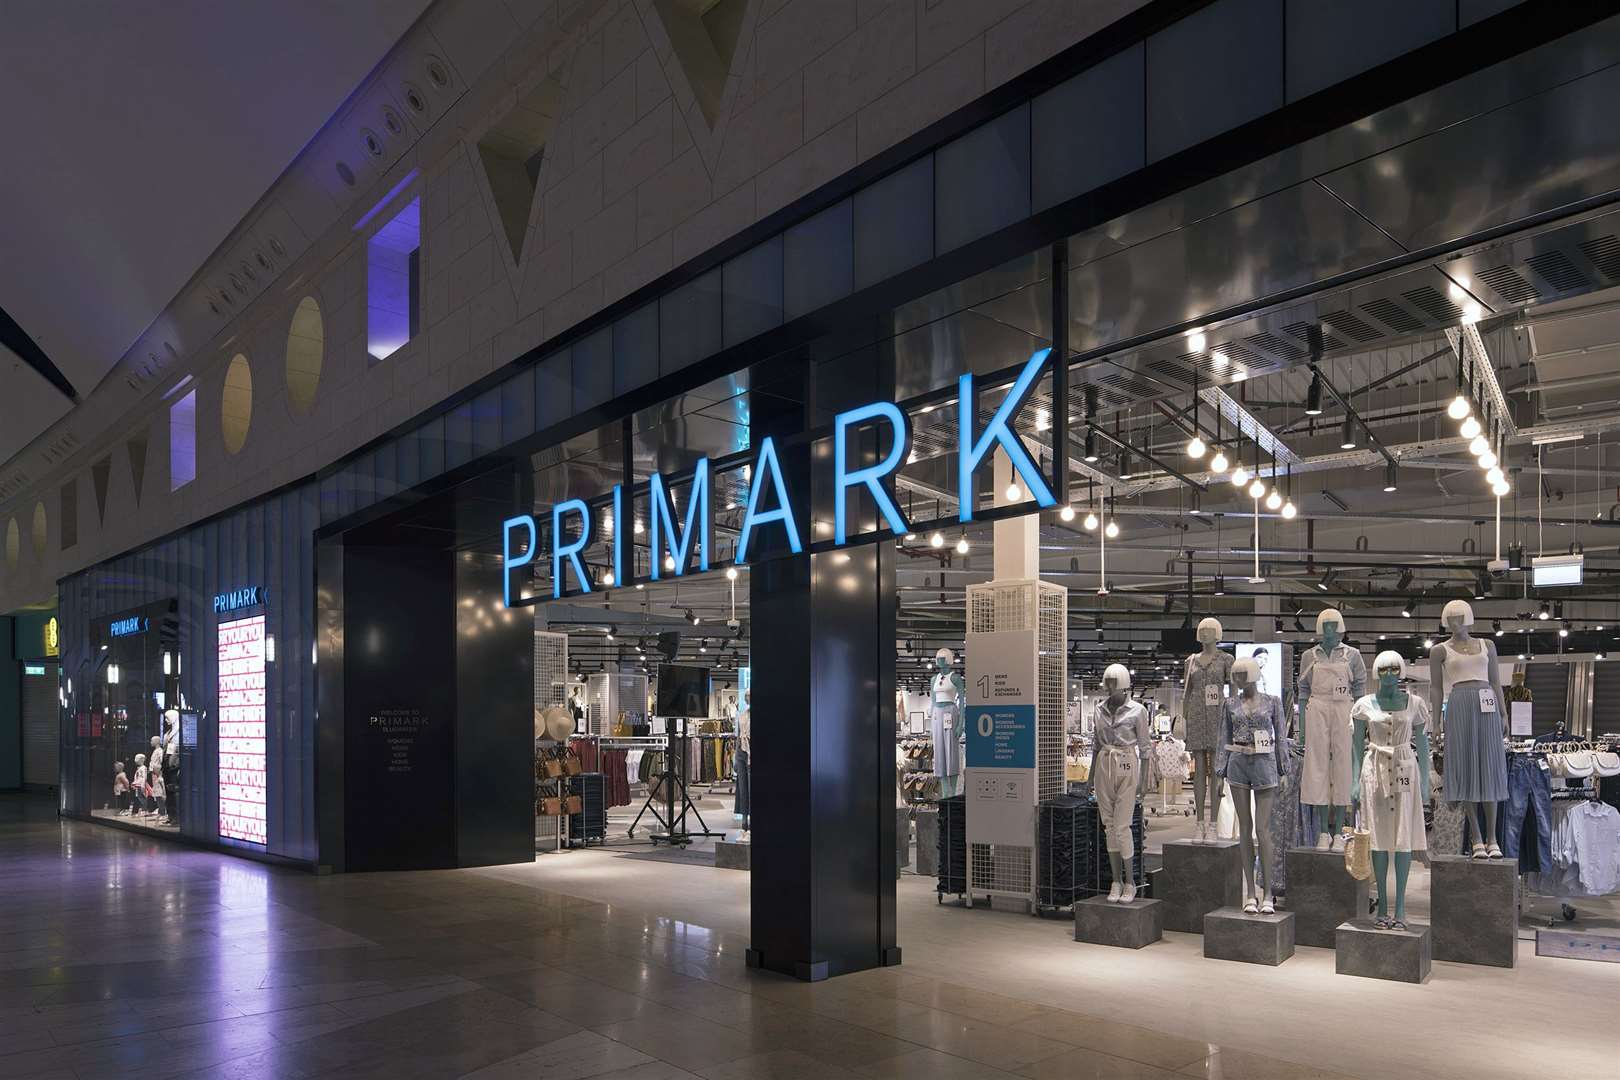 Despite store closures during the pandemic, Primark has not reverted to online shopping